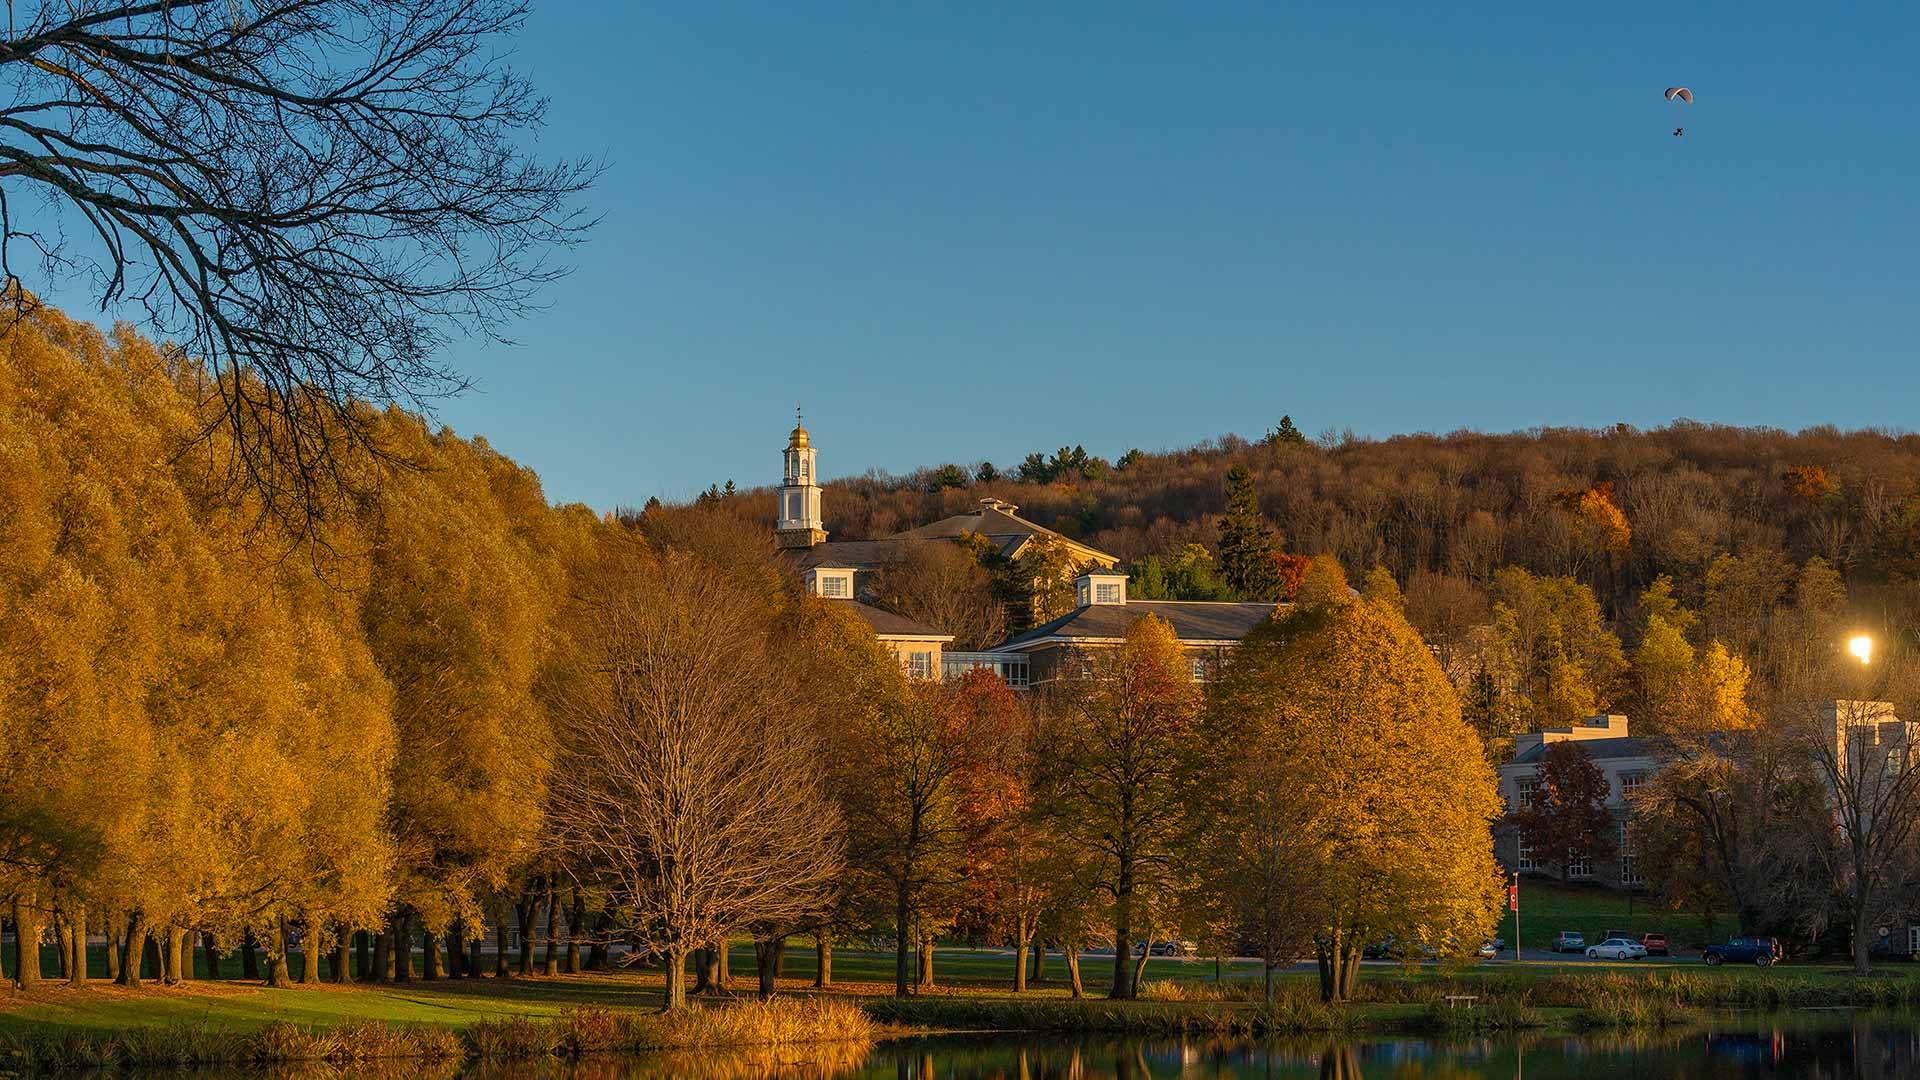 A scenic view of the campus over Taylor Lake with the Memorial Chapel cupola in the background.